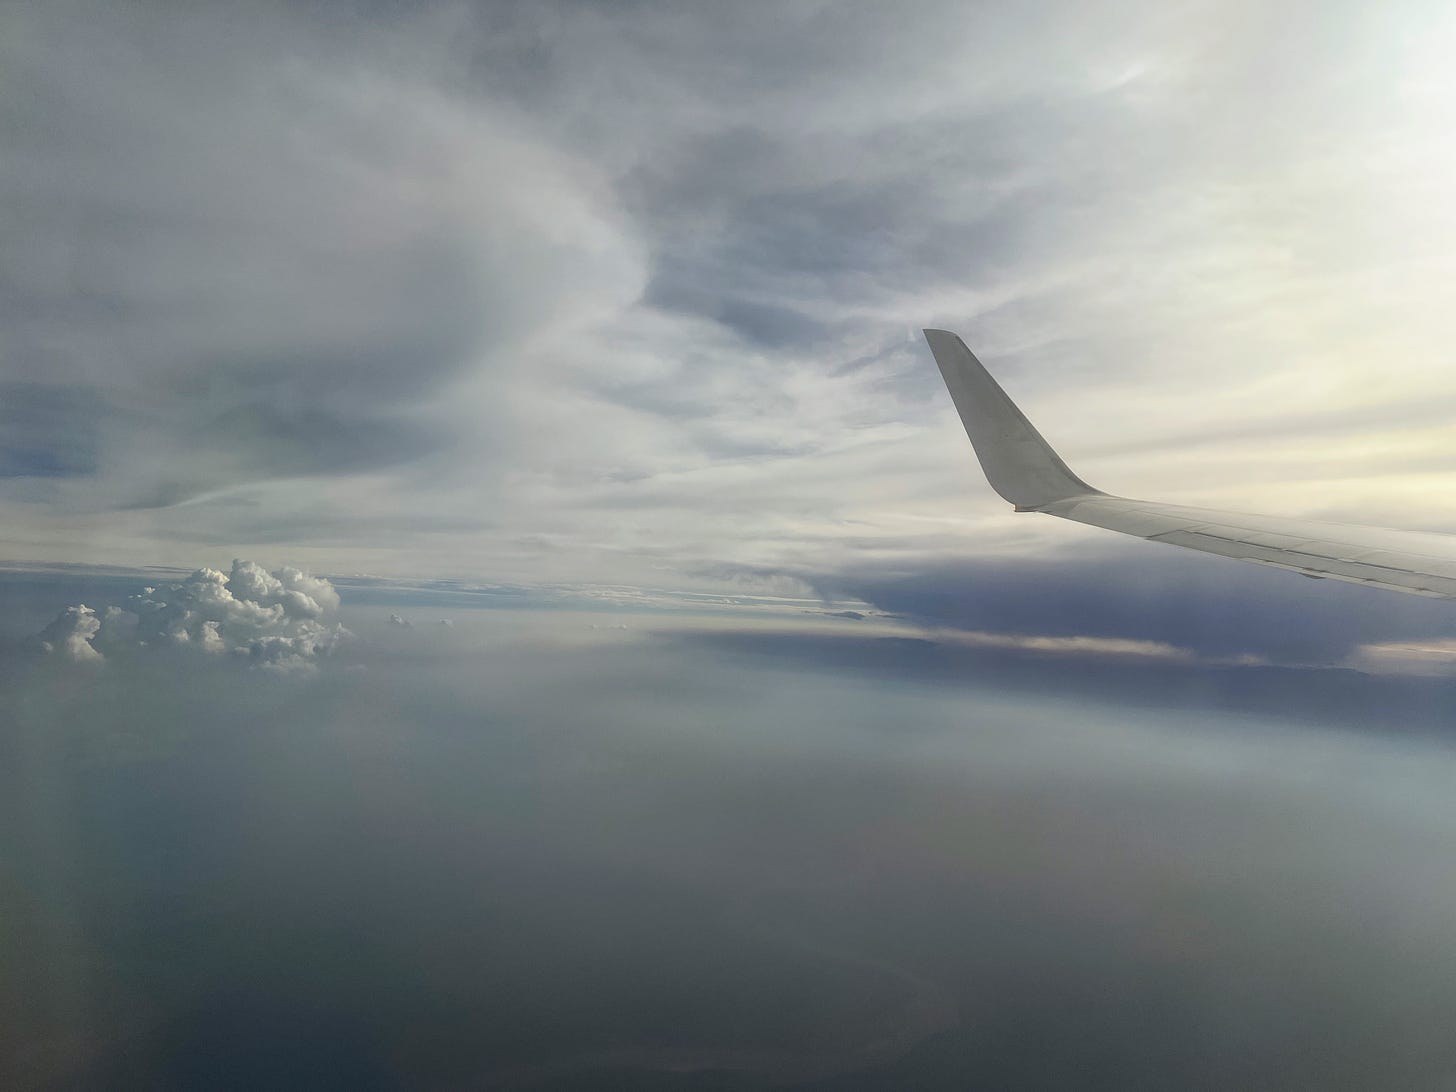 Somewhere in the clouds above Nigeria